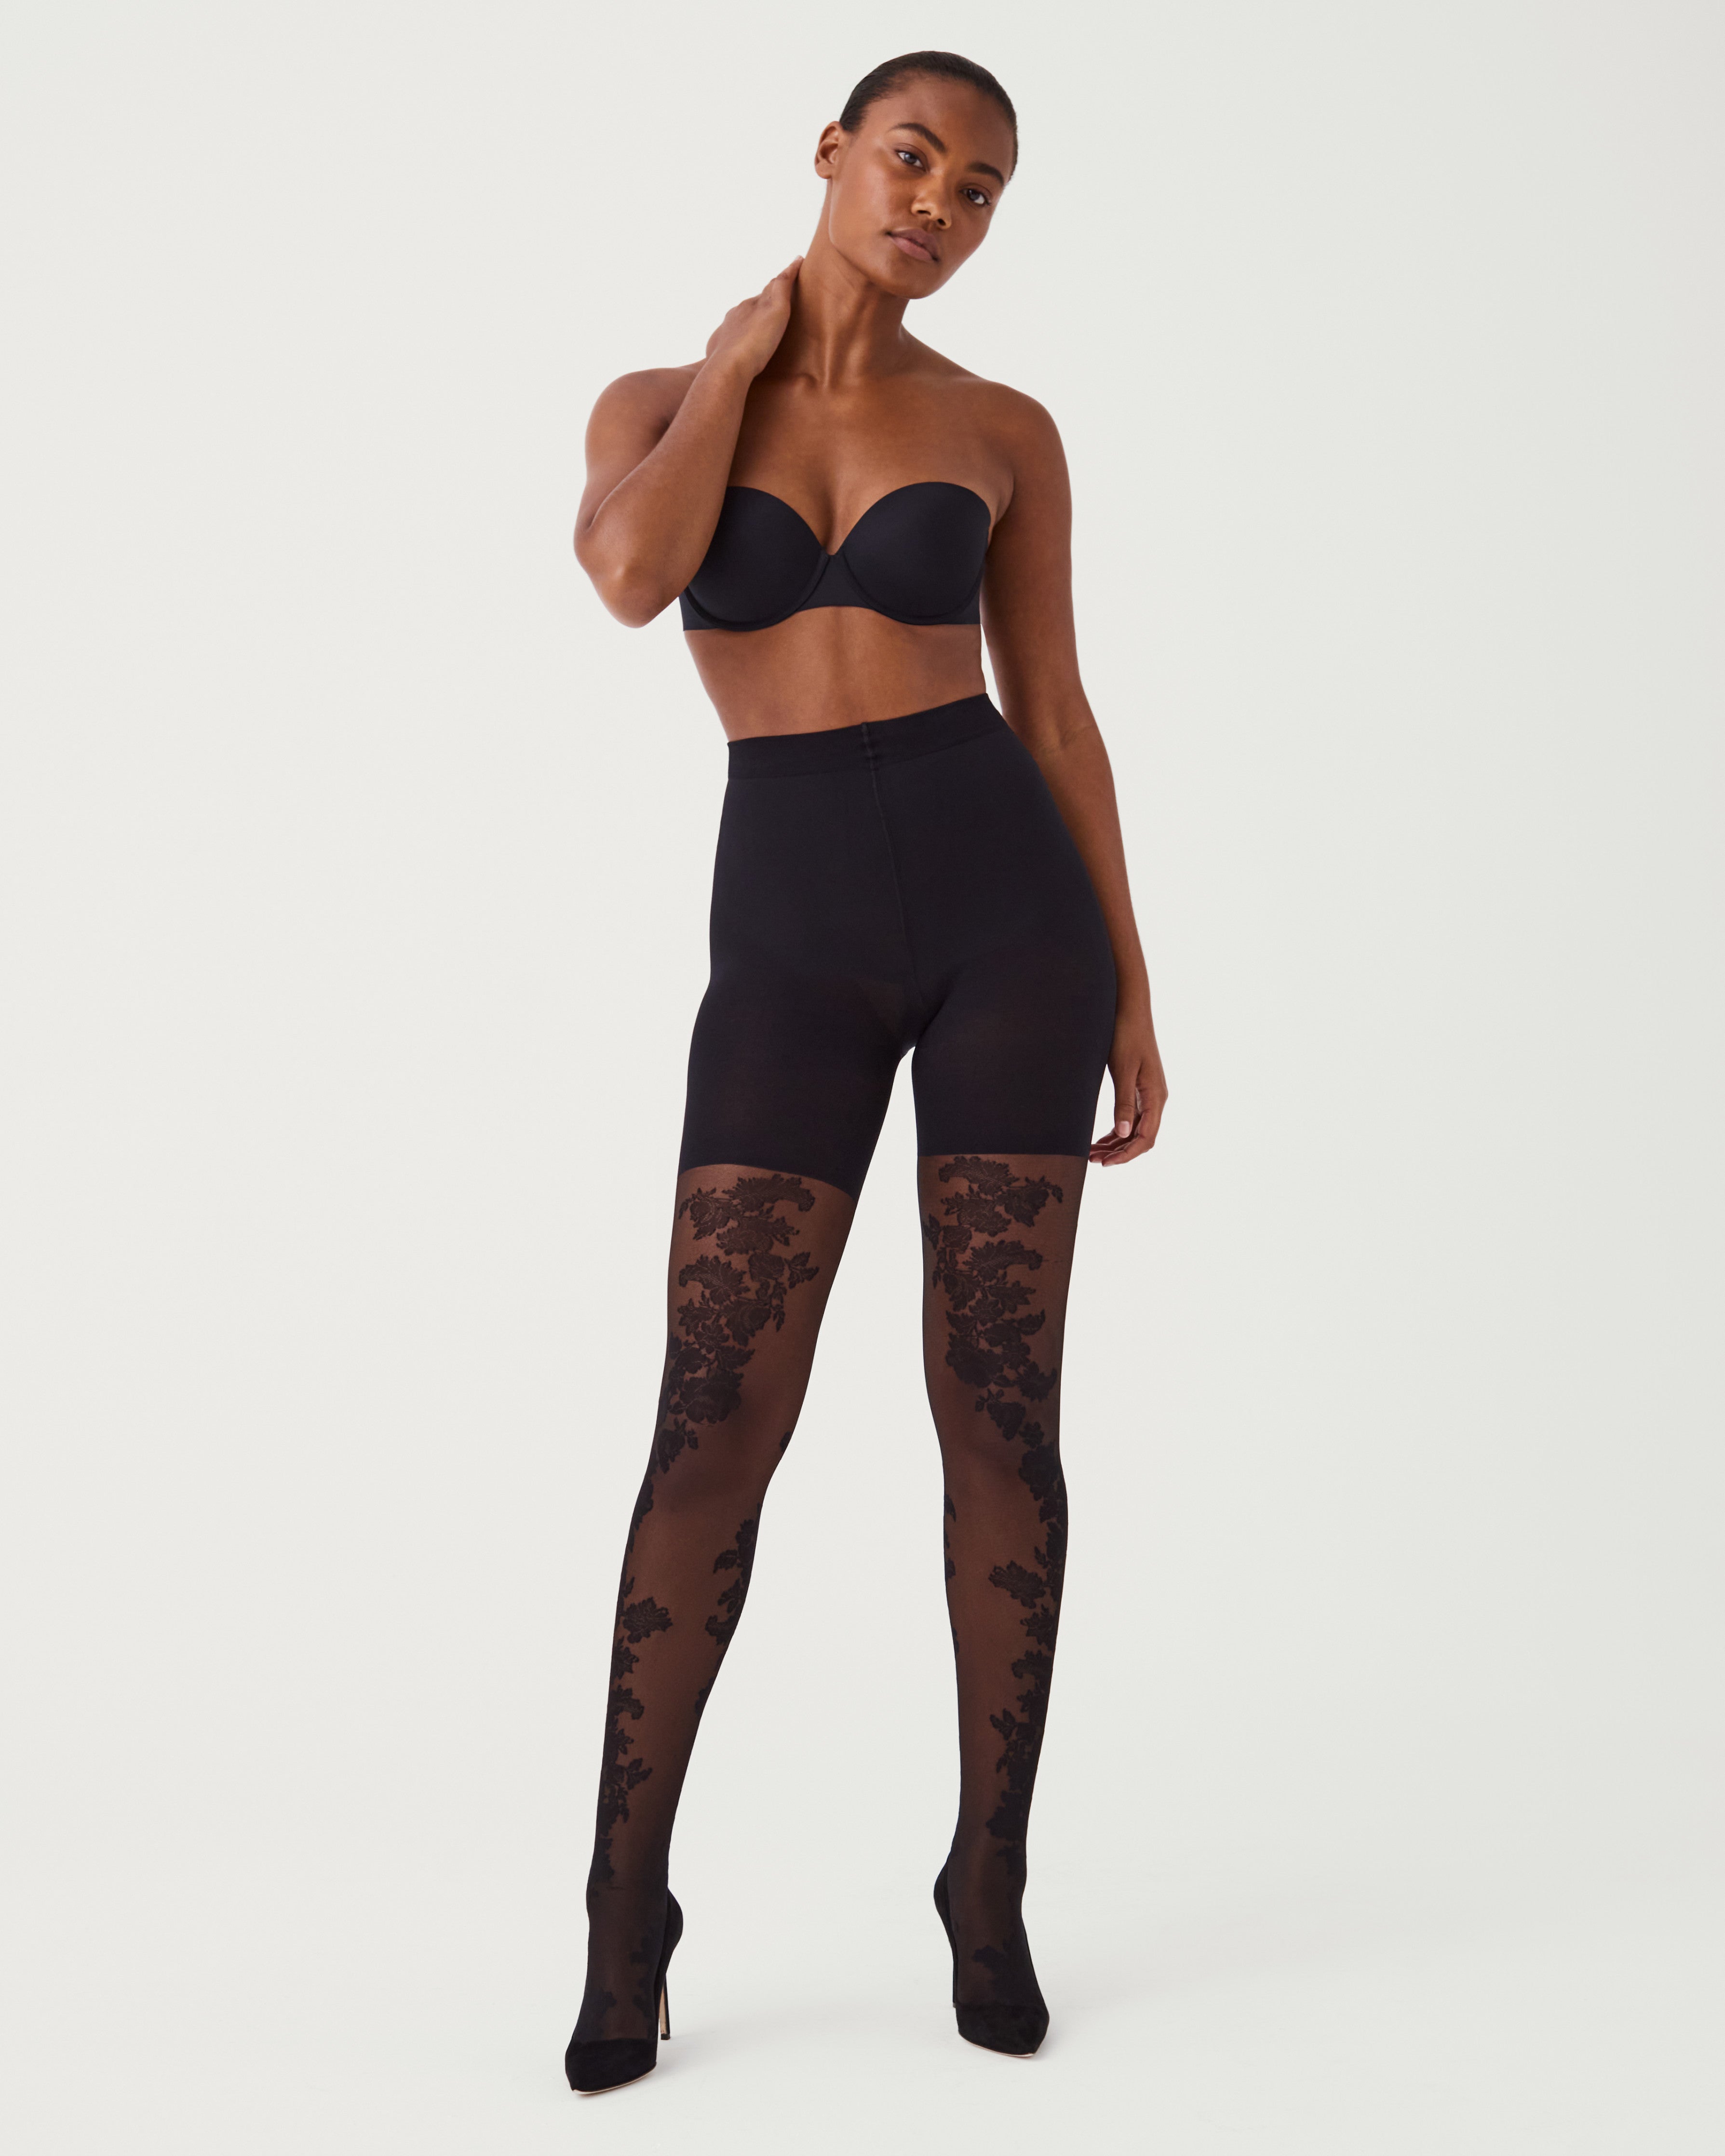 Ladies Lux Leg Tight End Tights by Spanx